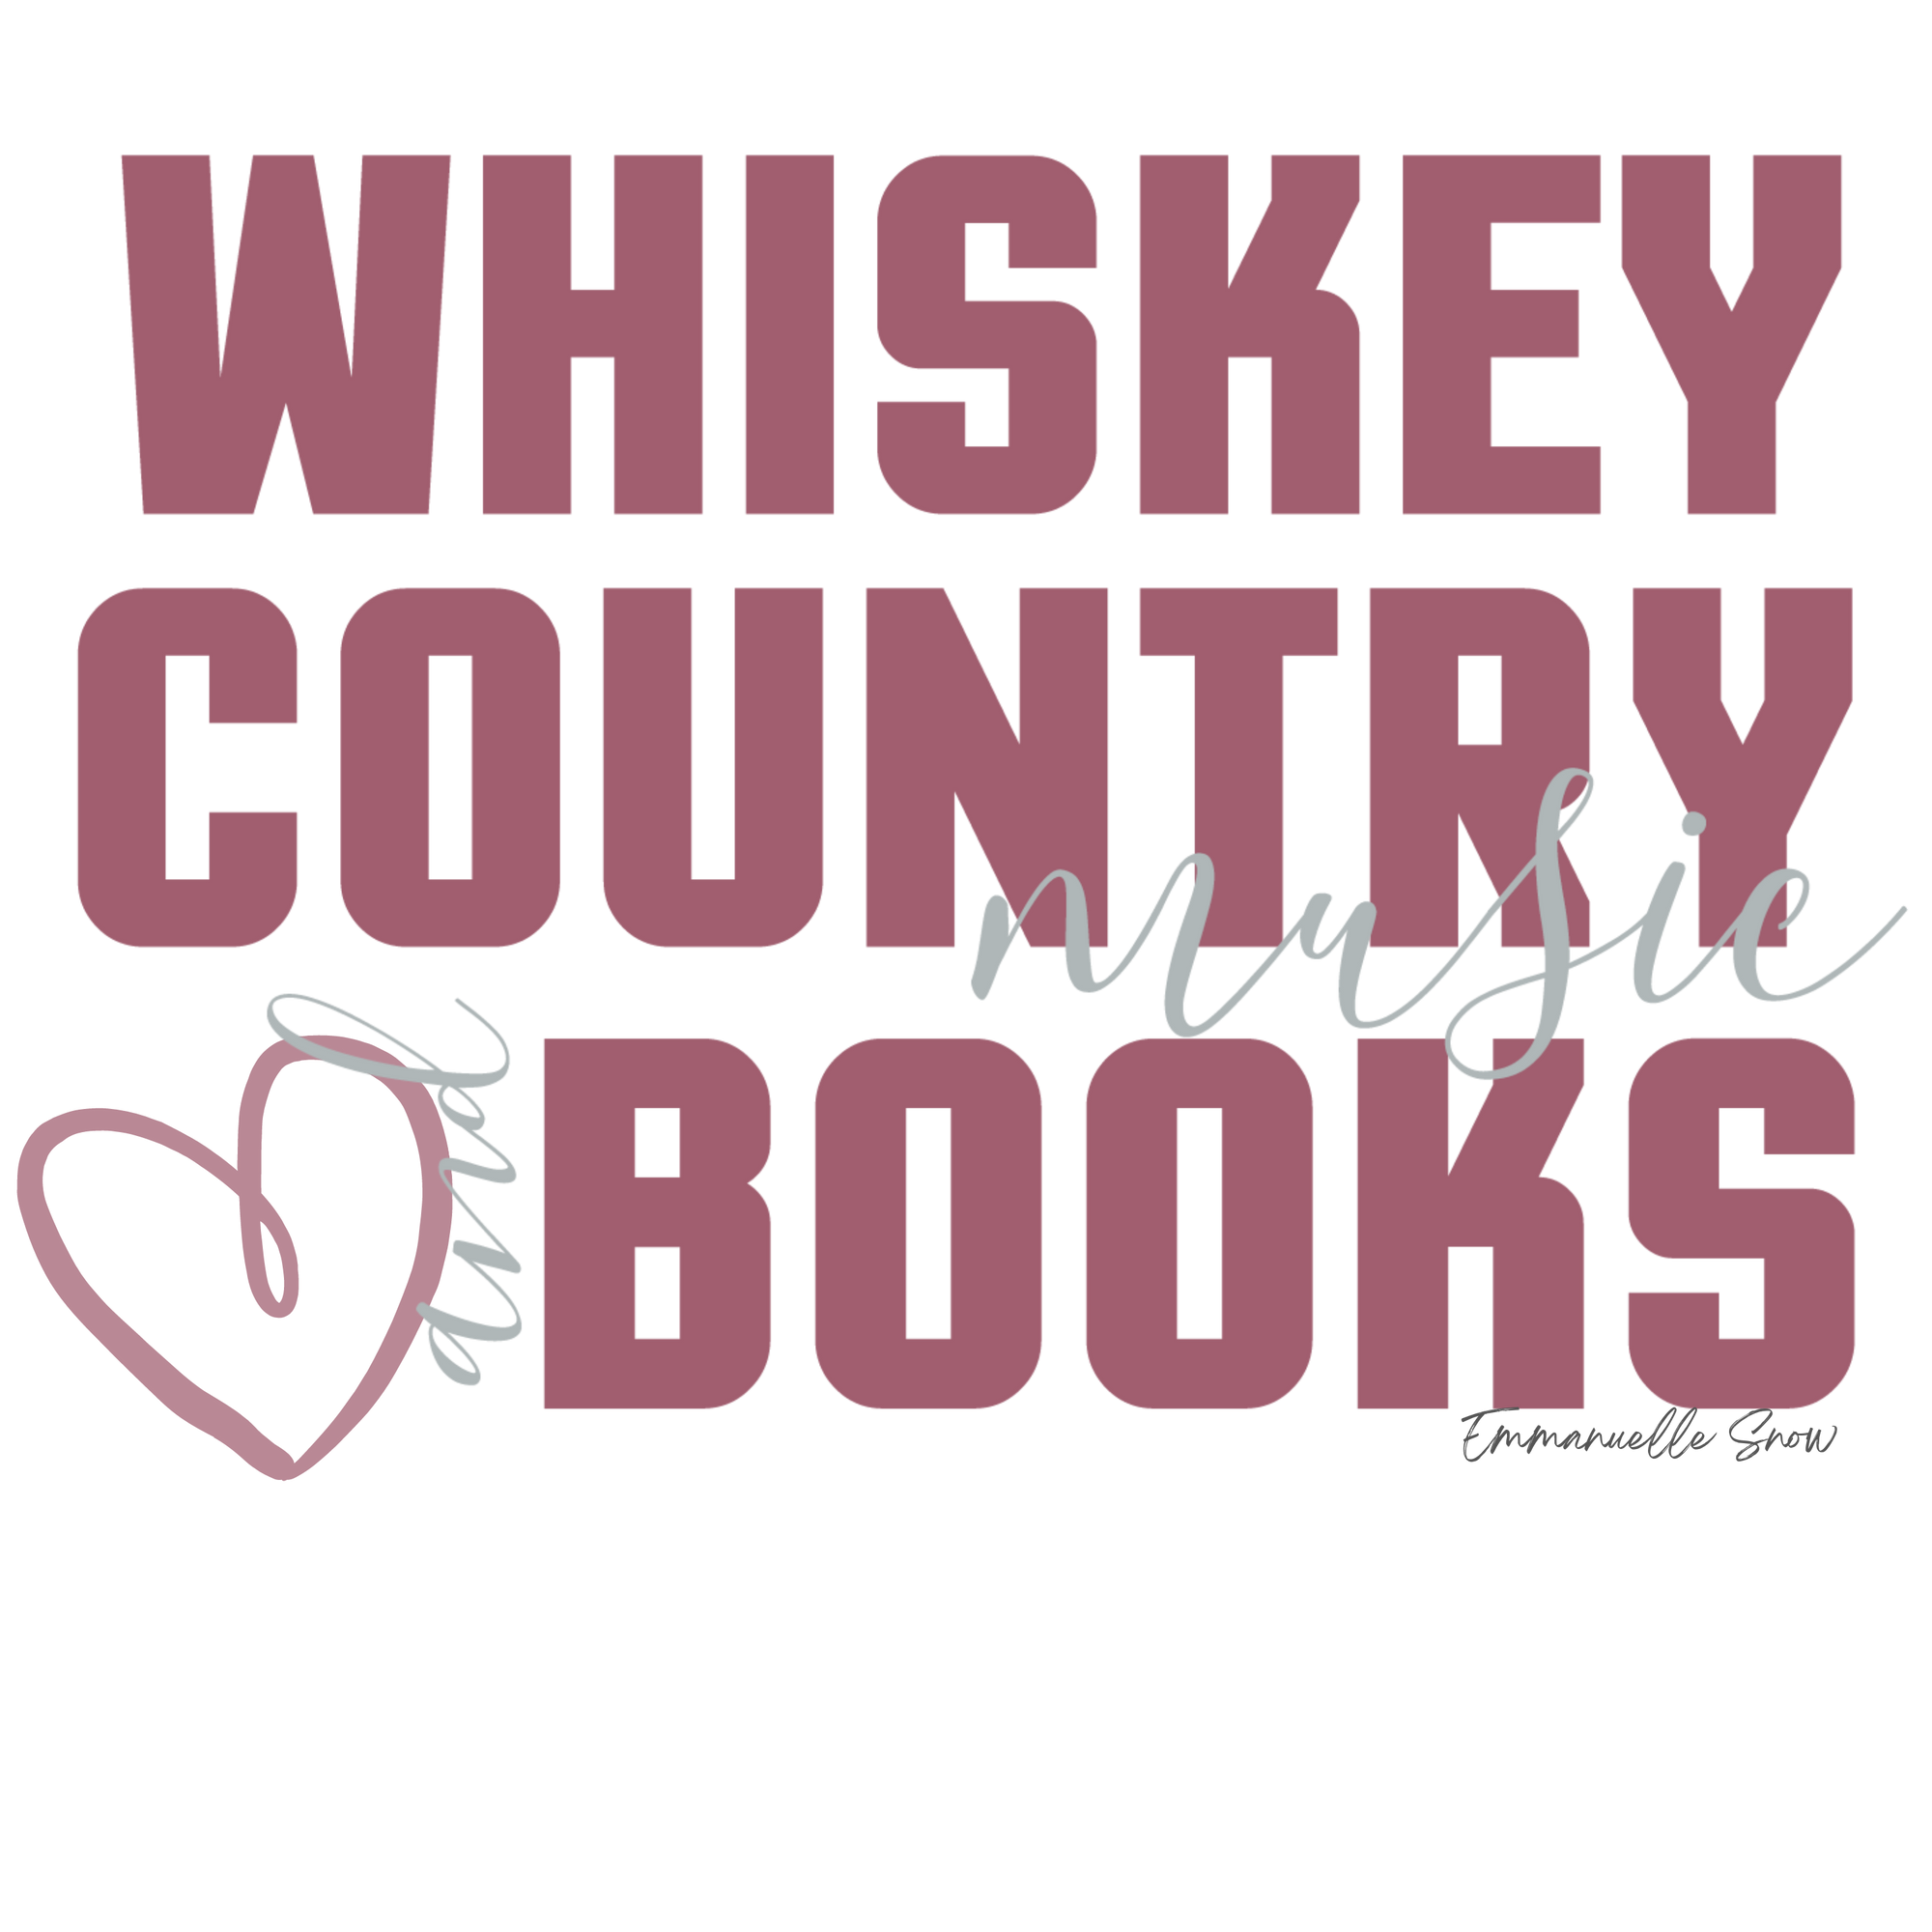 Emmanuelle Snow books Carter Hills band Whiskey country music books